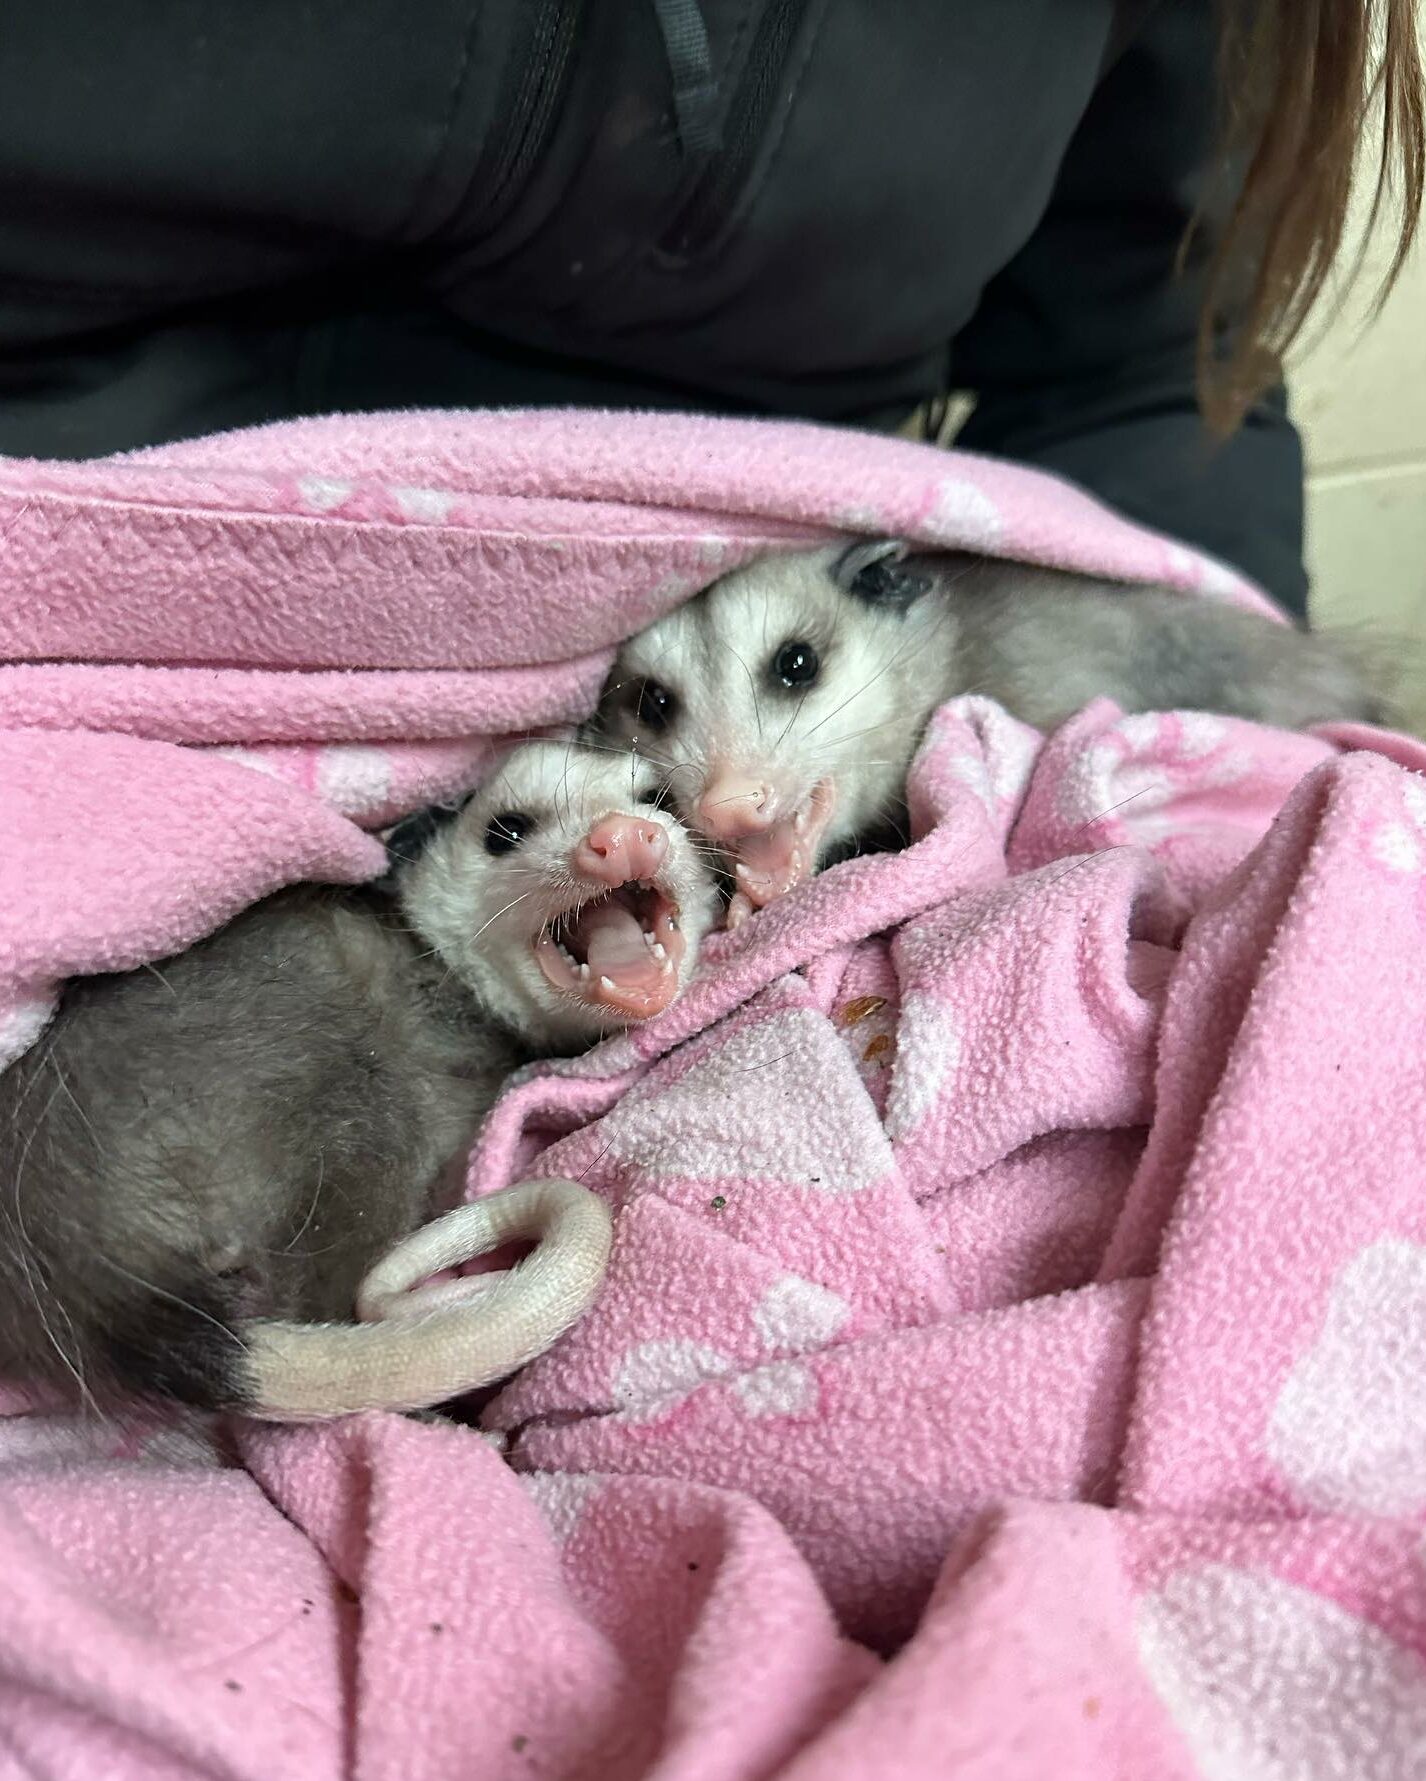 two opossum joeys in a pink blanket.